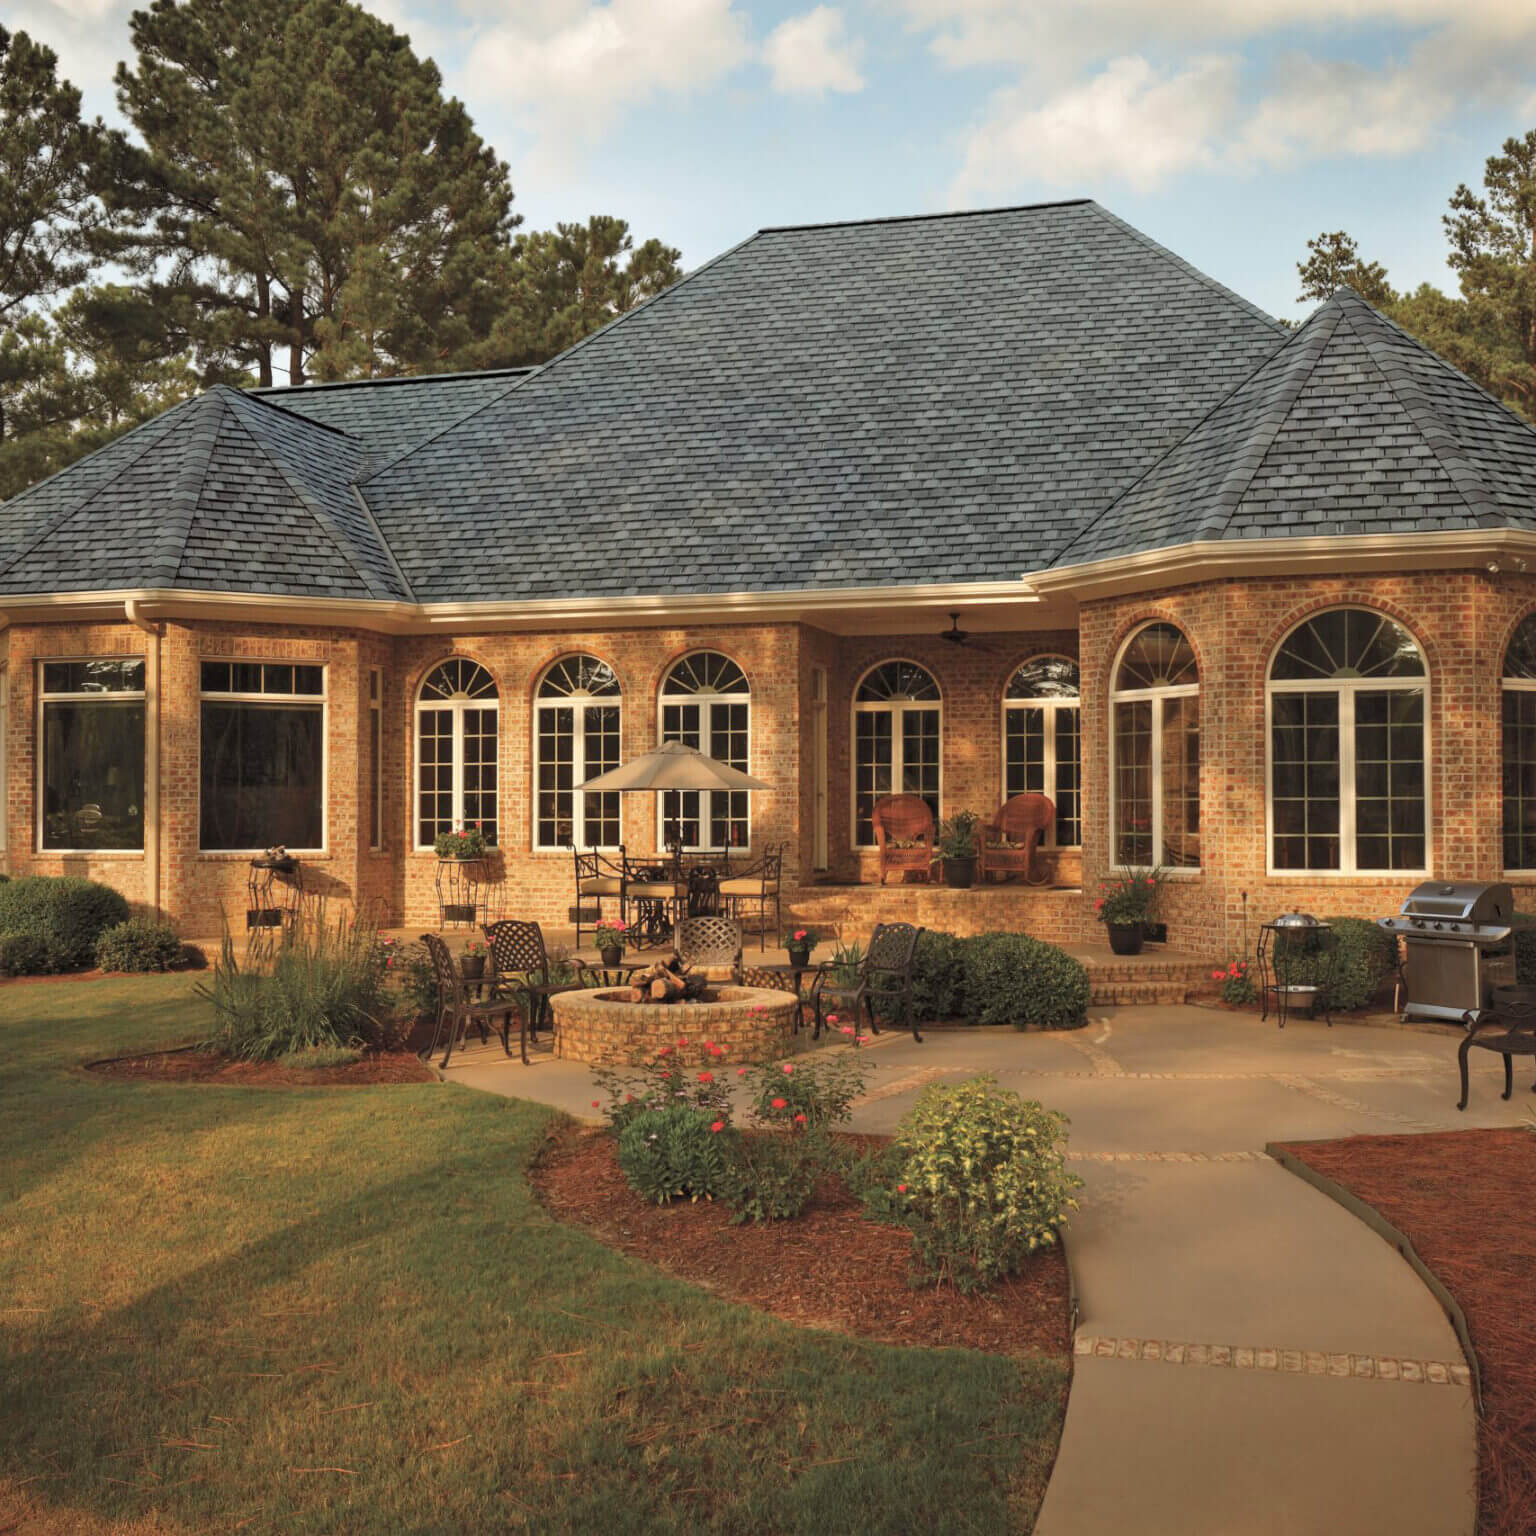 Photo displaying a home using GAF's Camelot Aged Oak Shingles